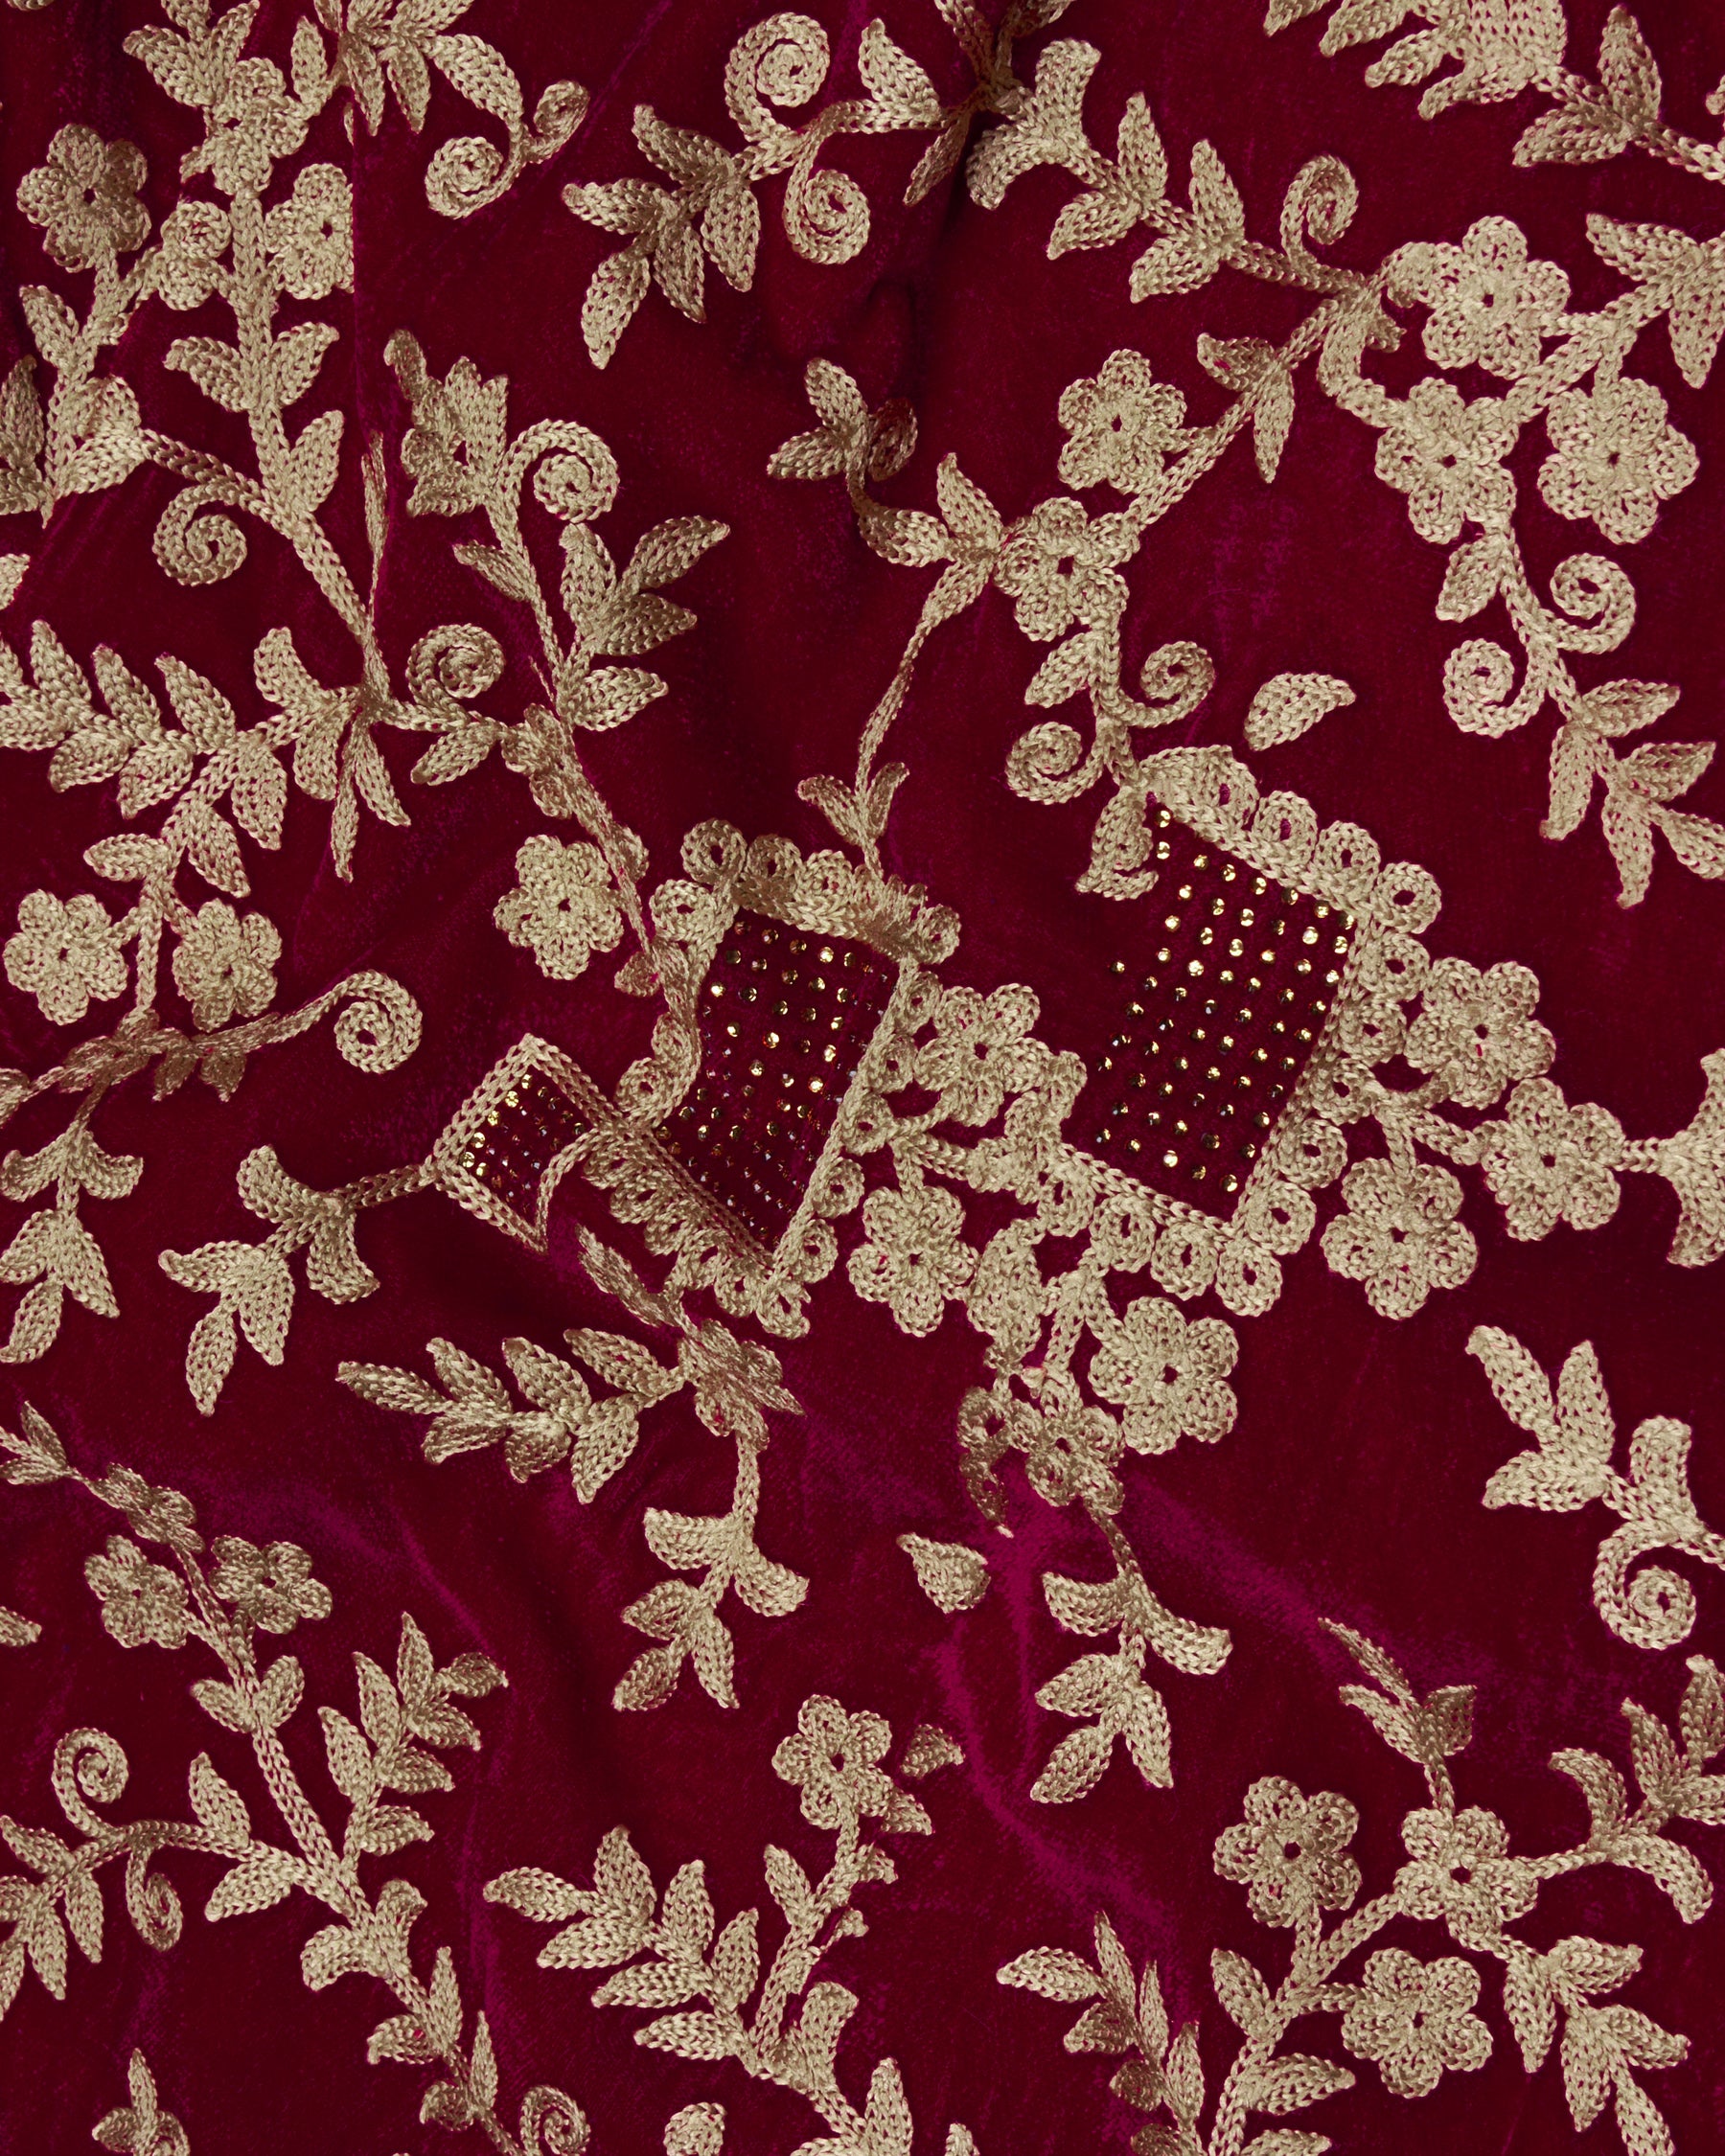 Castro Red with Oyster Brown Diamond Work with Cotton Thread Heavy Embroidered Bandhgala Designer Indo-Western Blazer